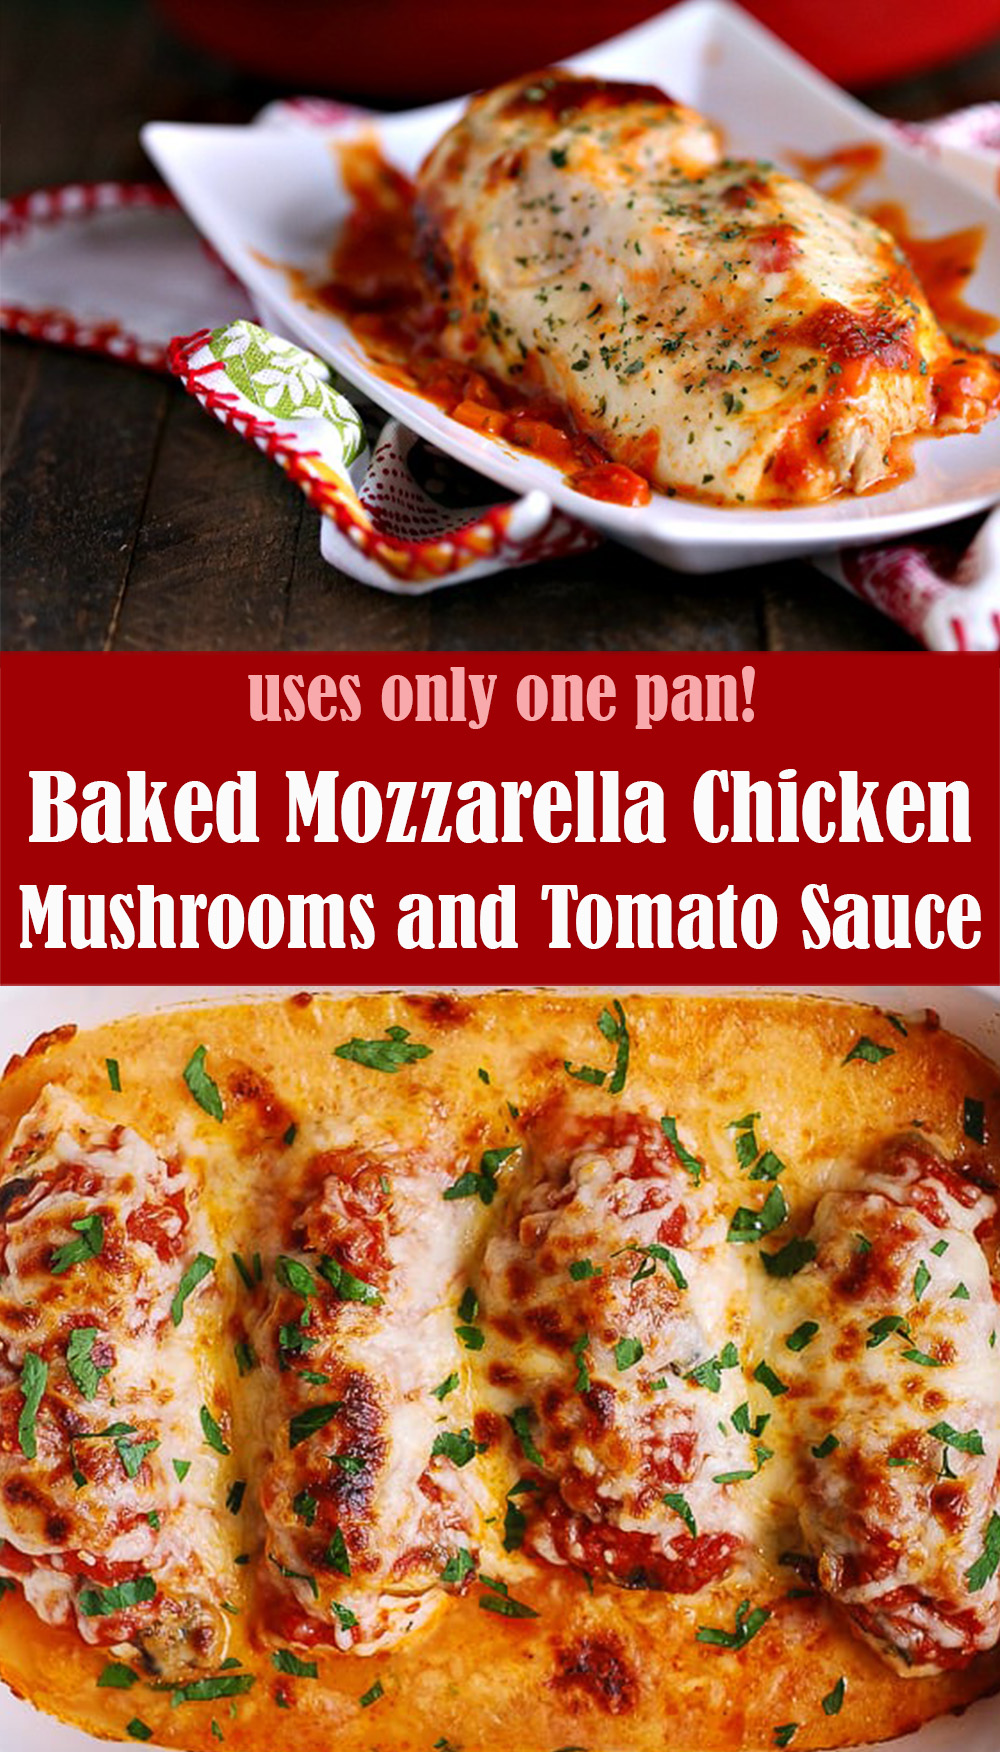 Easy Baked Mozzarella Chicken with Mushrooms and Tomato Sauce